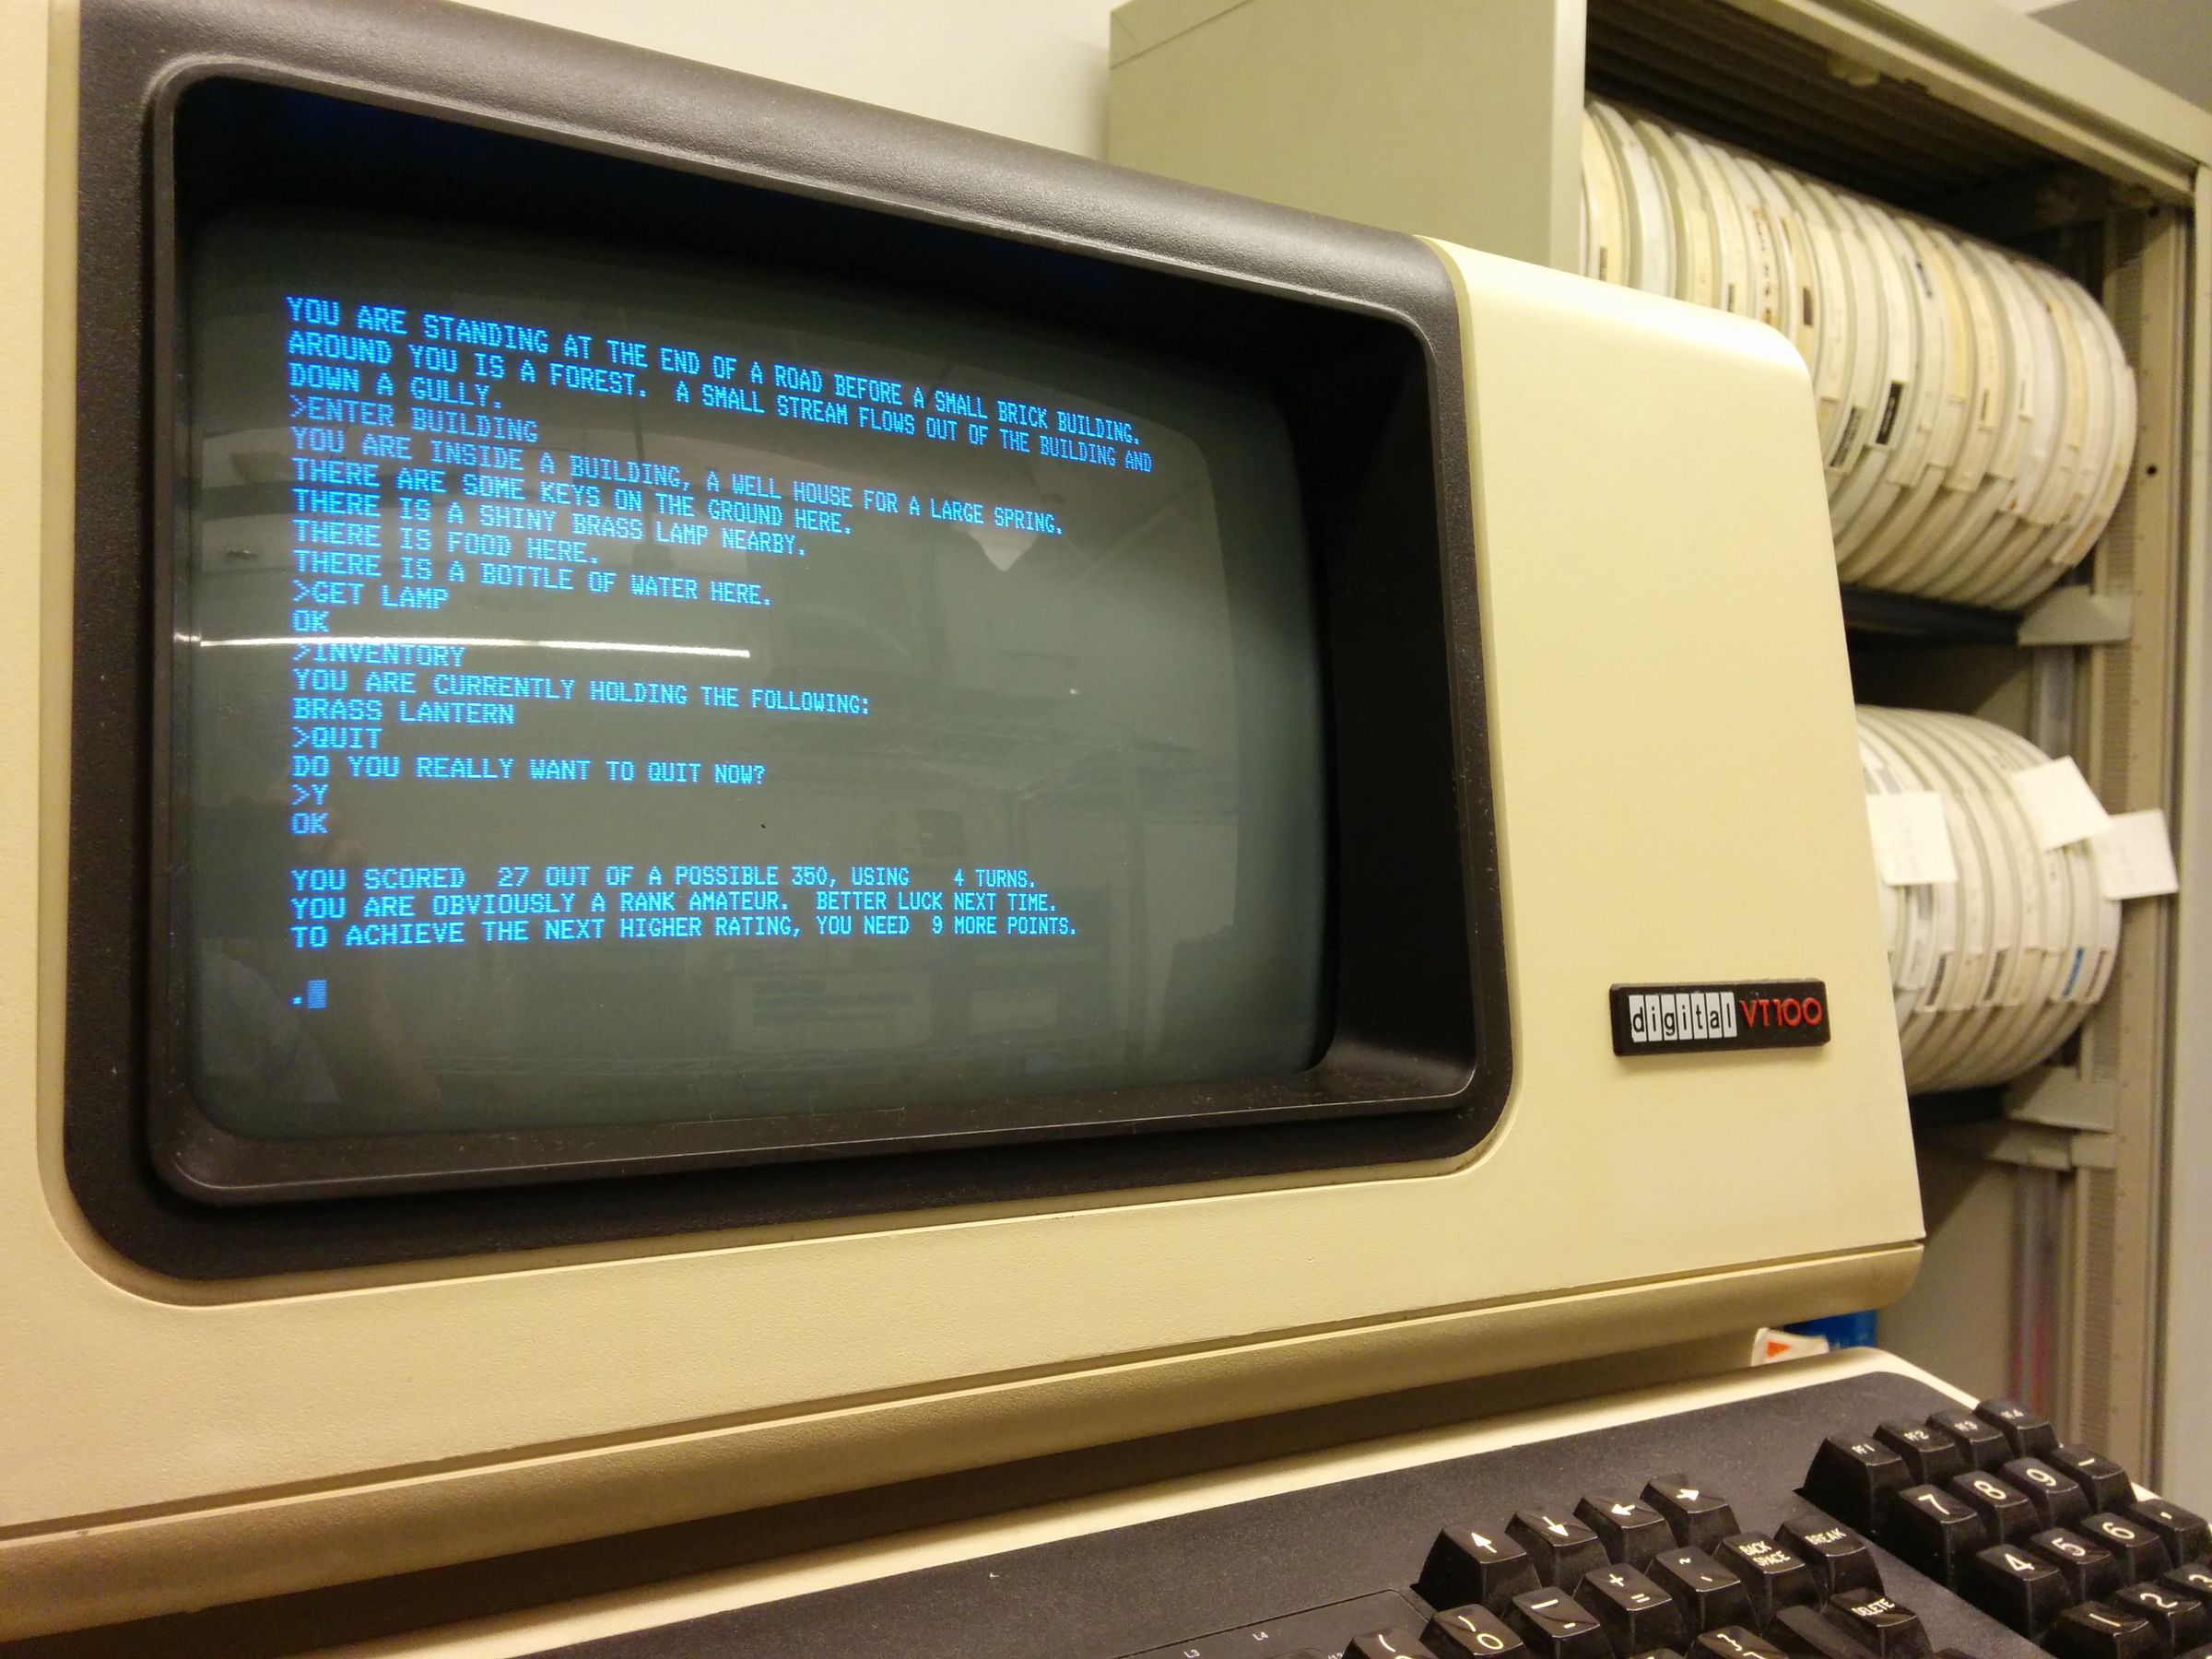 Colossal Cave Adventure running on a PDP-11/34 with a monitor.